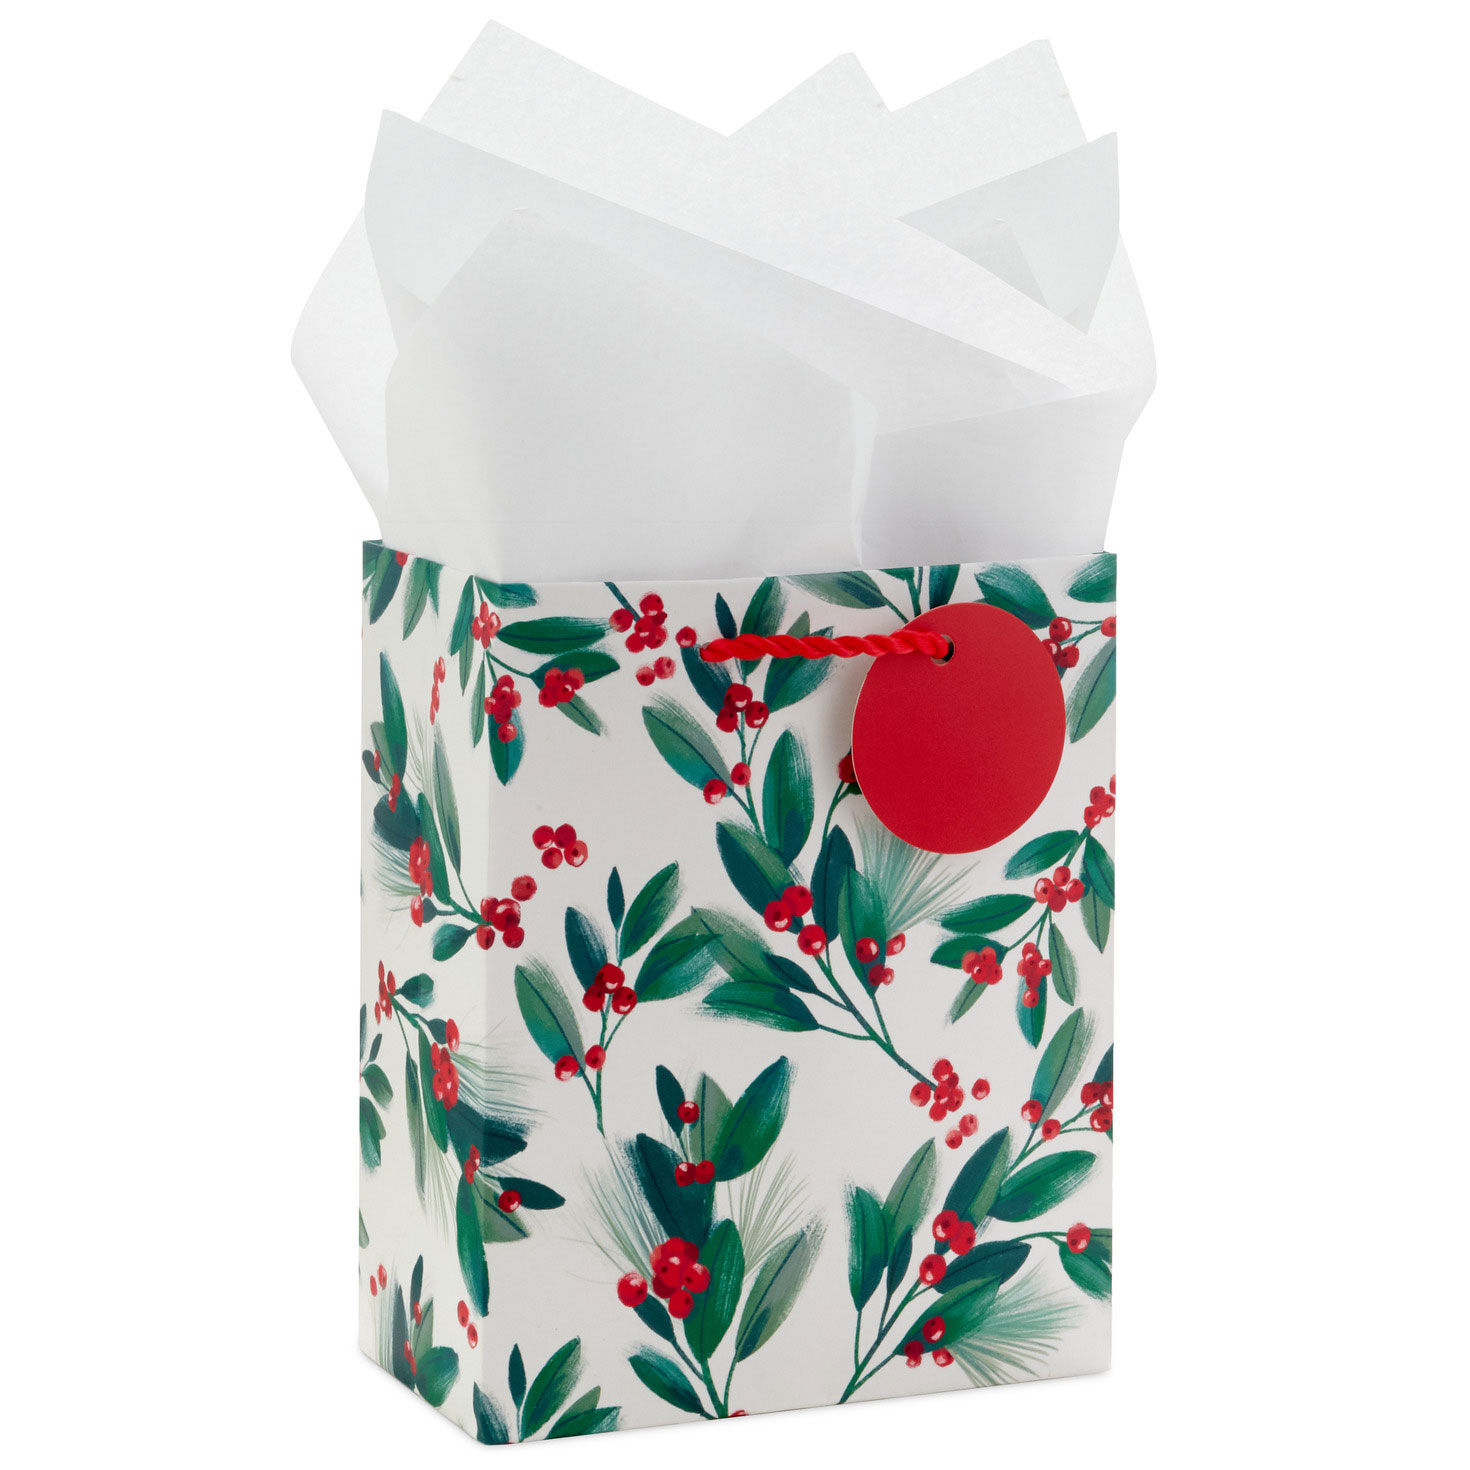  SUNCOLOR 6 Pack 9 Small Christmas Gift Bags With Tissue paper  : Health & Household